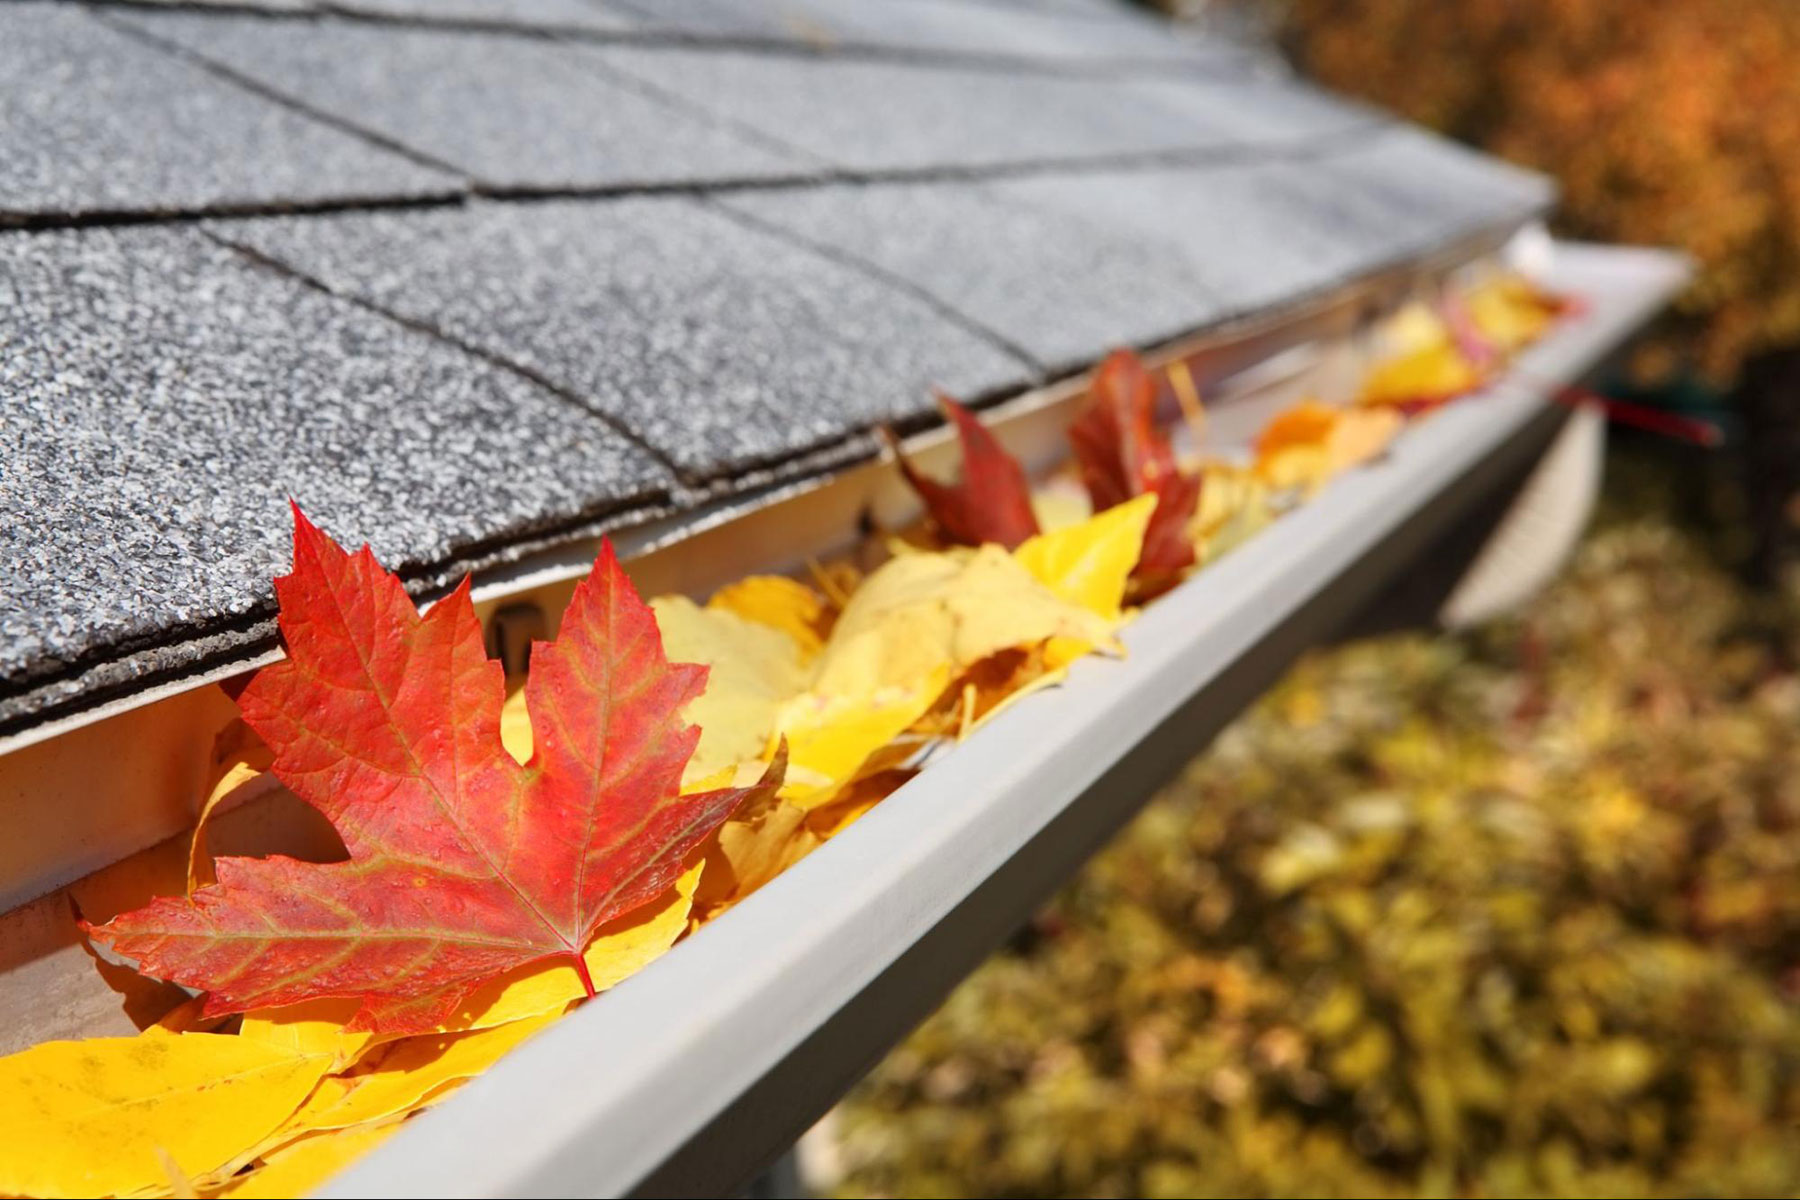 Winter Prep: Ensuring Your Home’s Warmth During the Cold Months